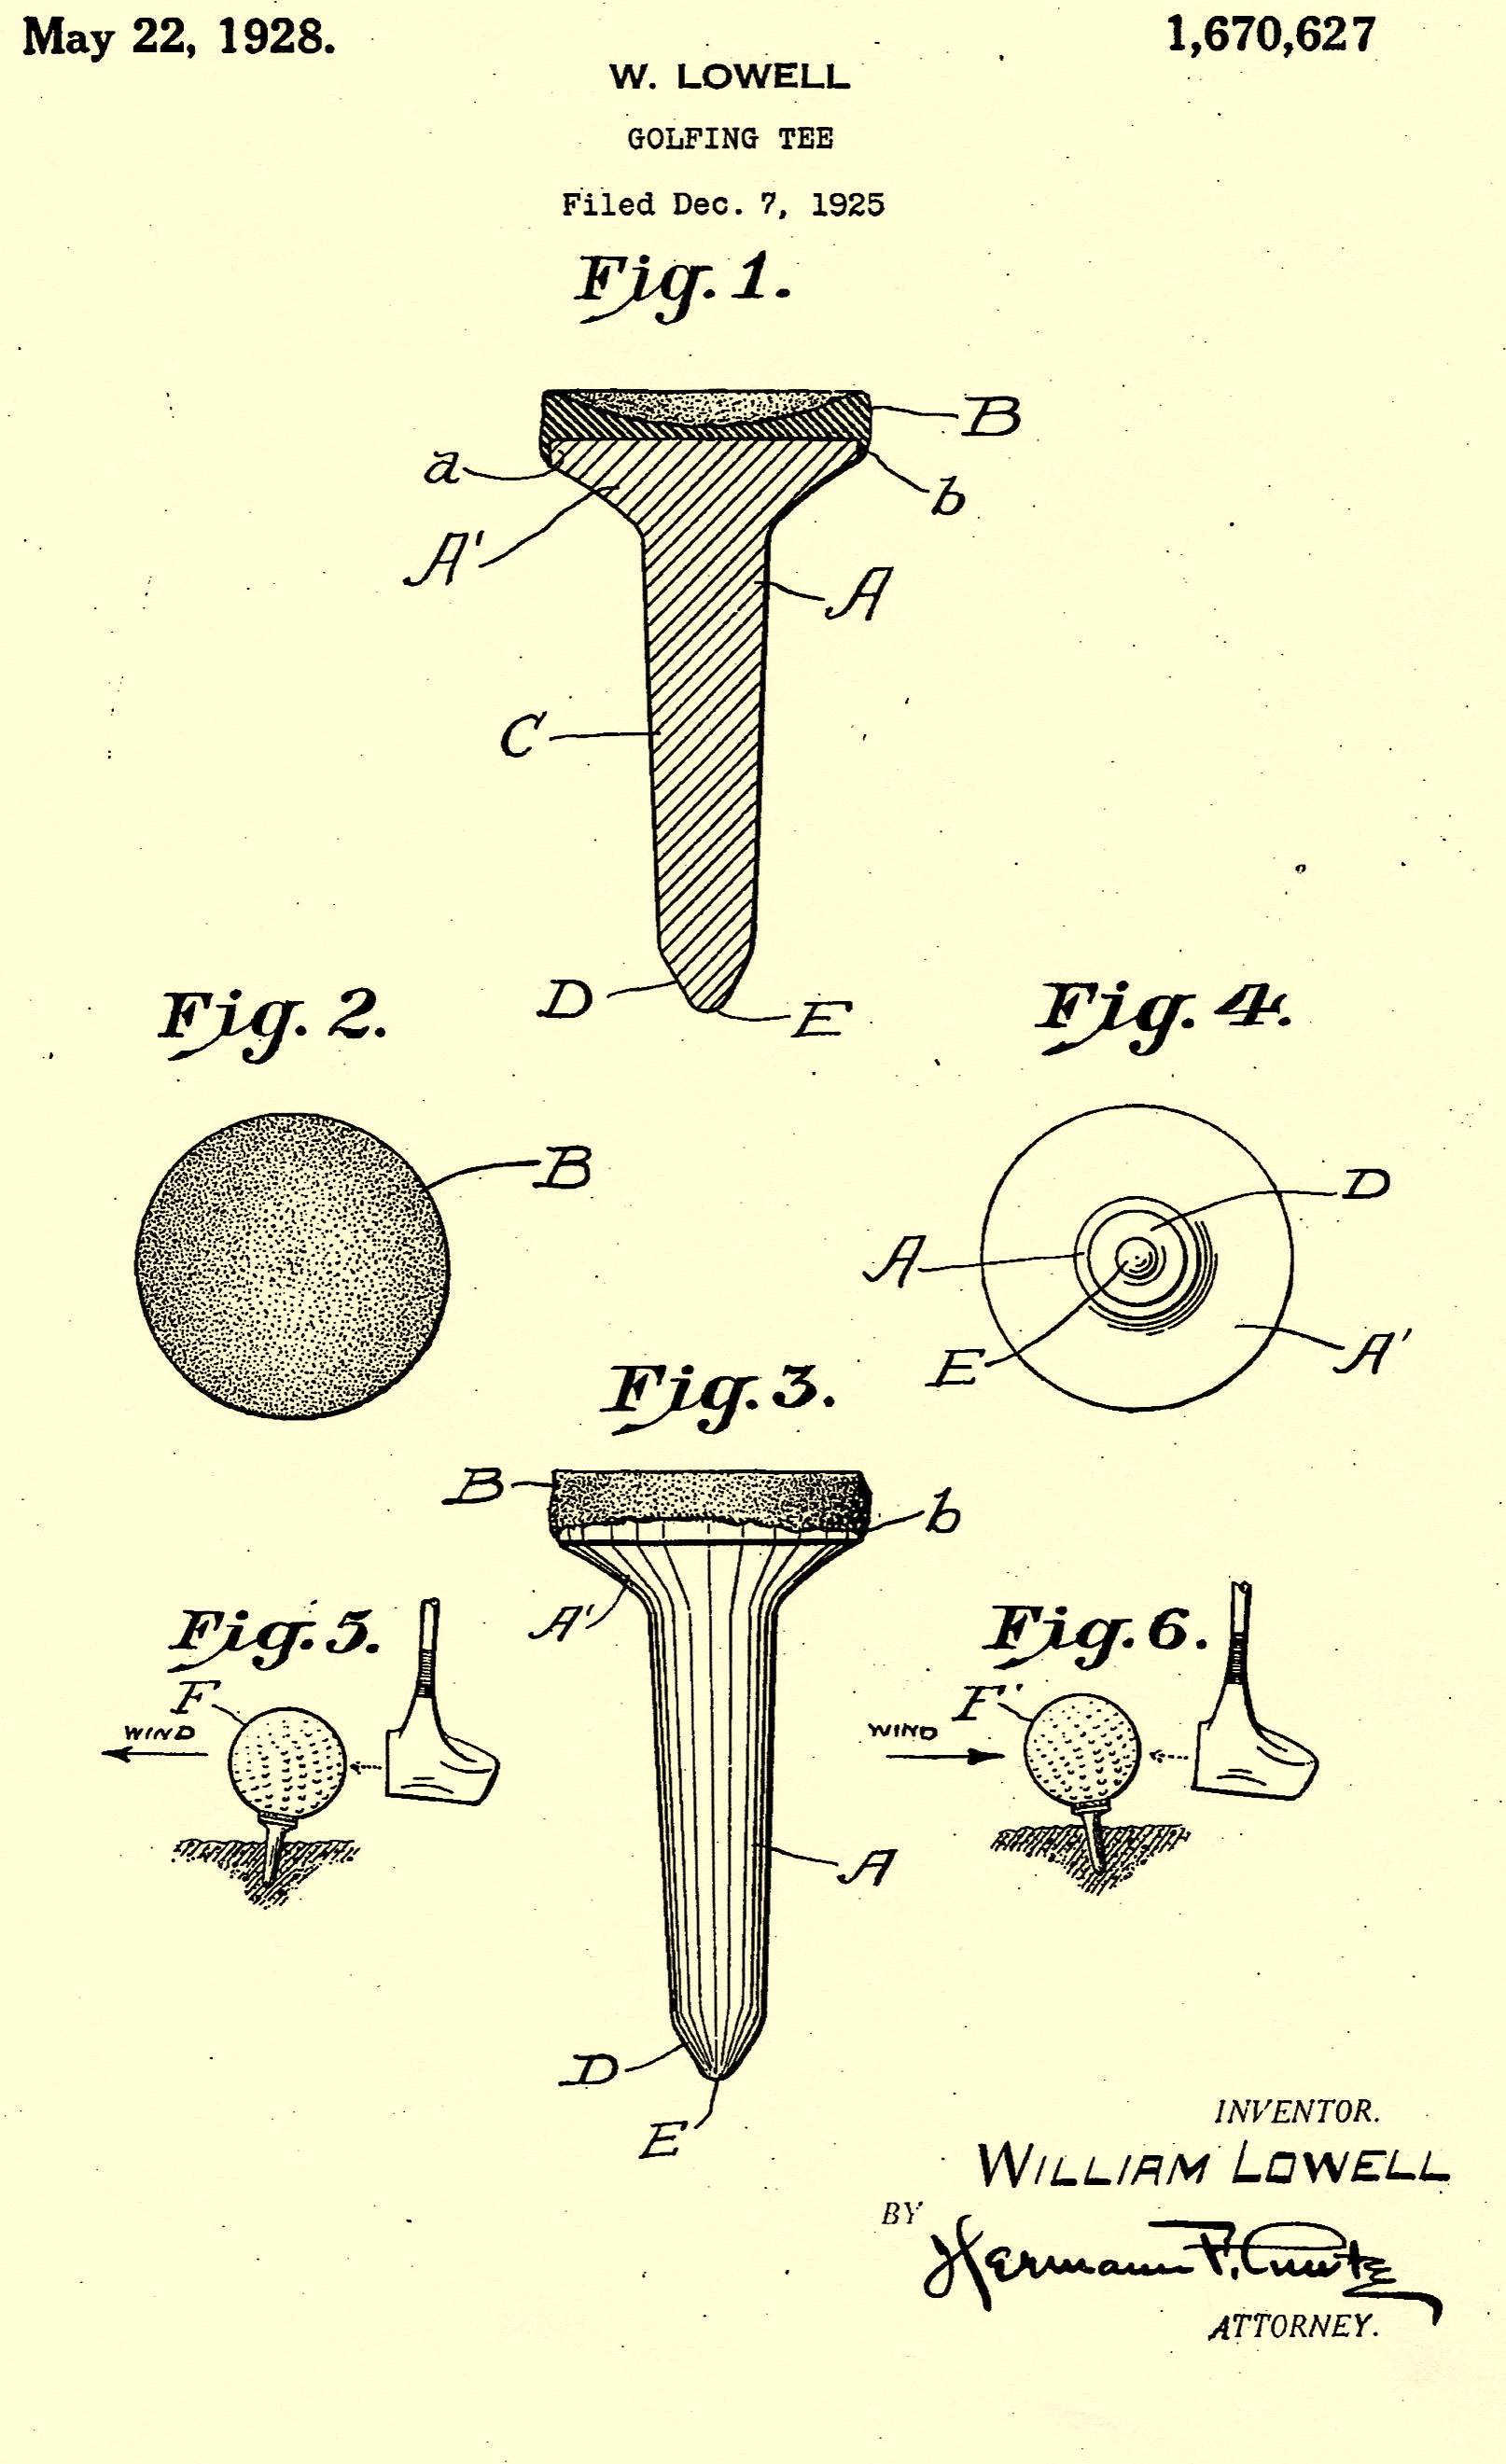 A copy of the patent drawing for Dr. Lowell's golf tee.